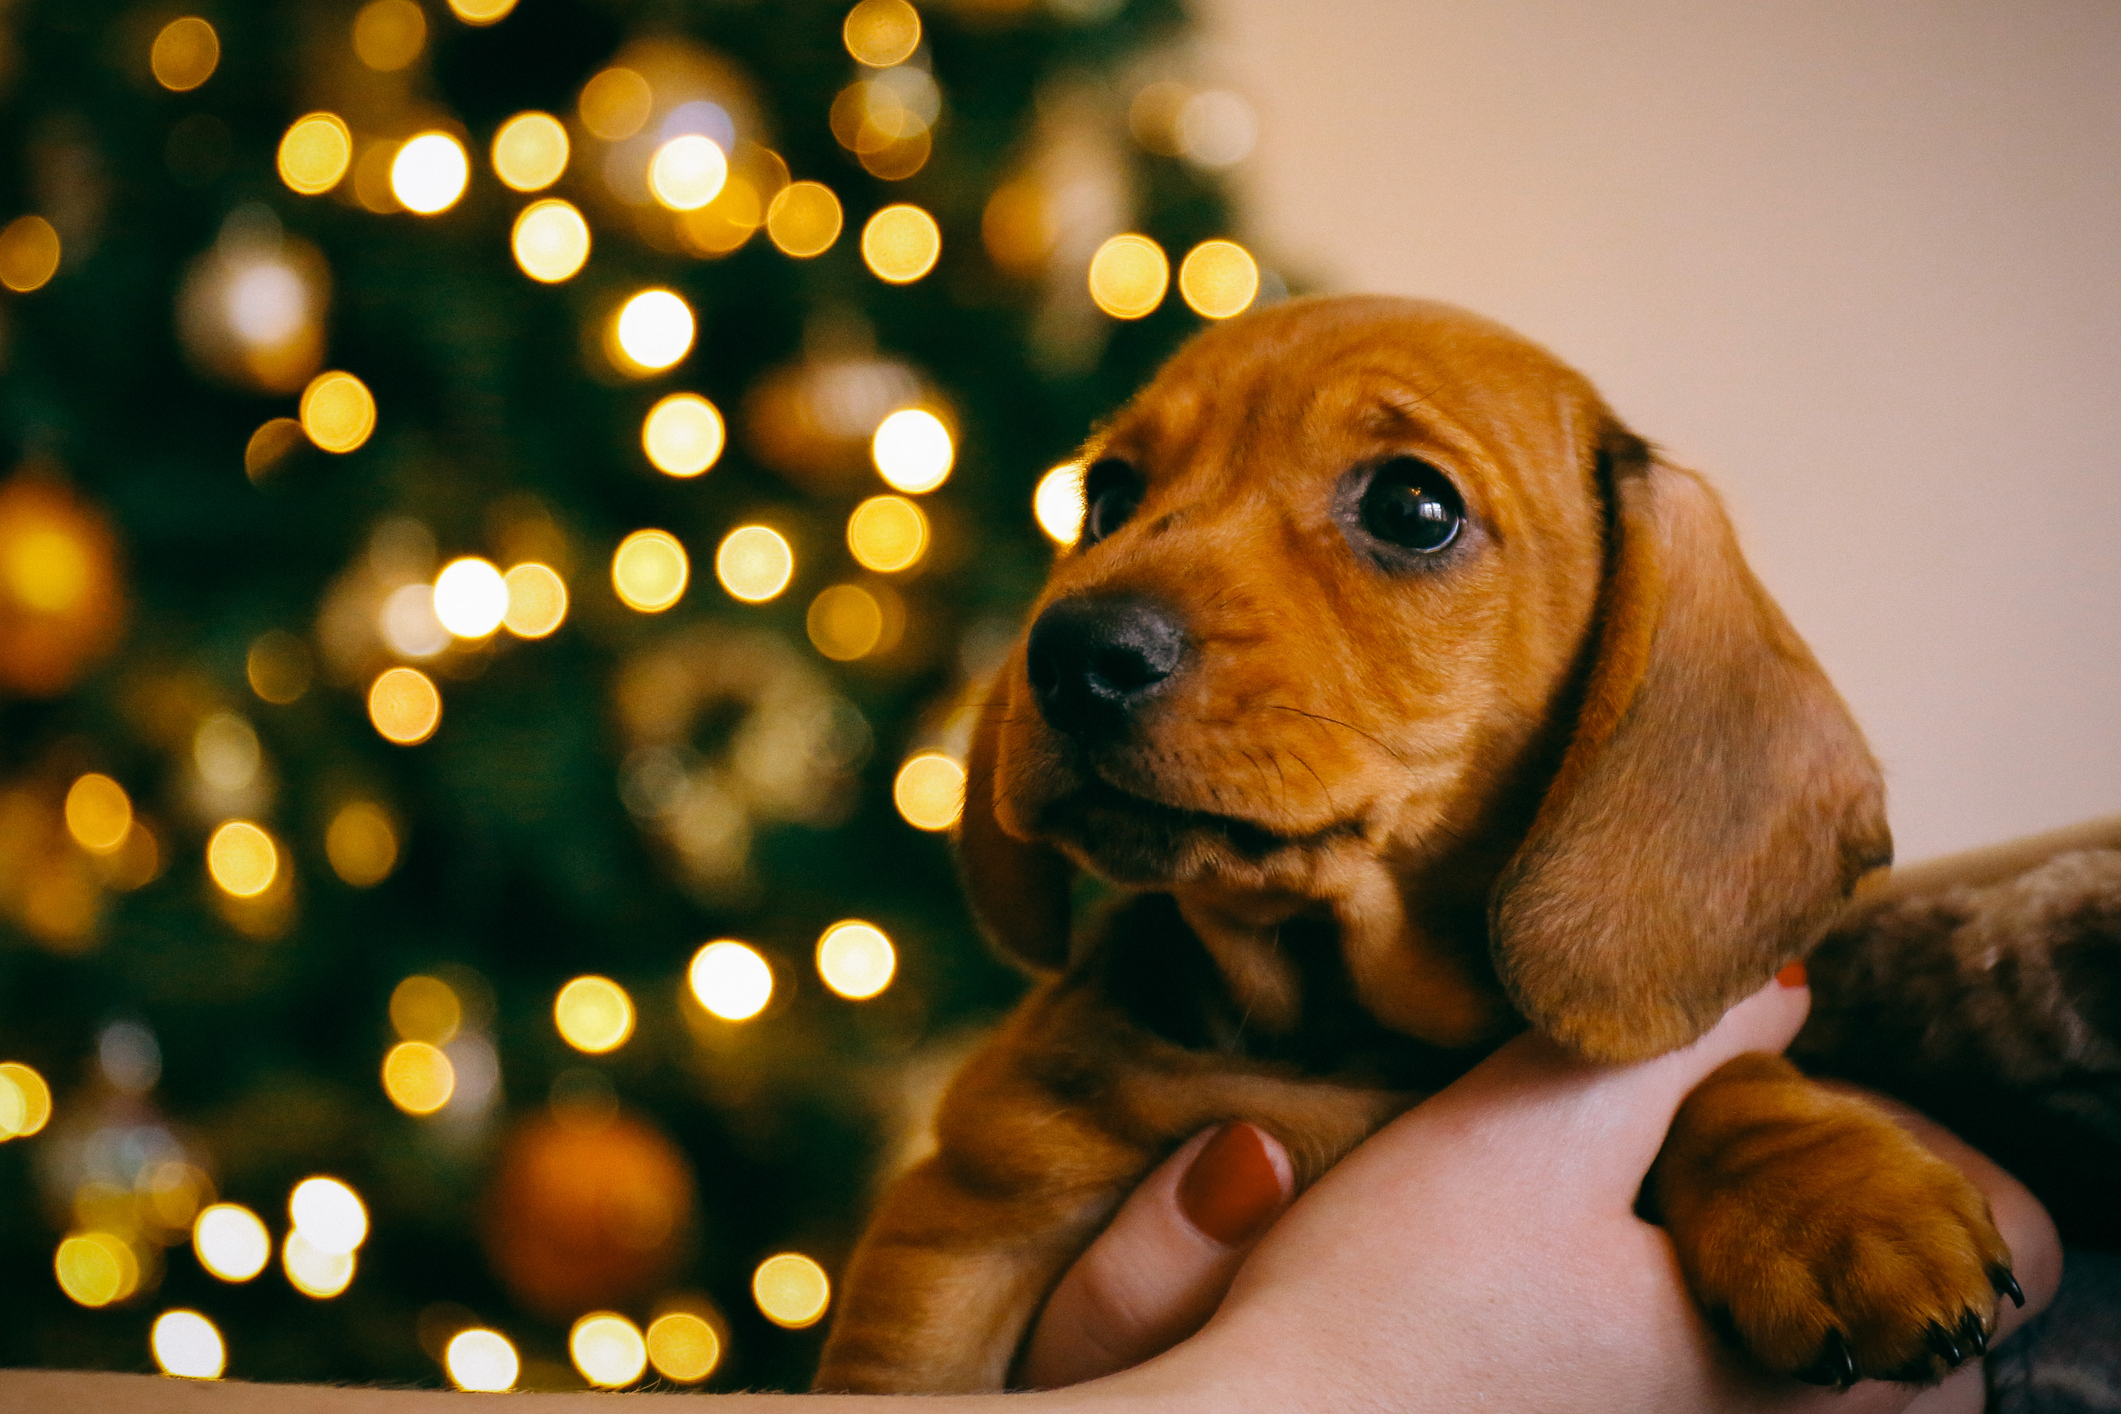 A pet is for life, not just for Christmas